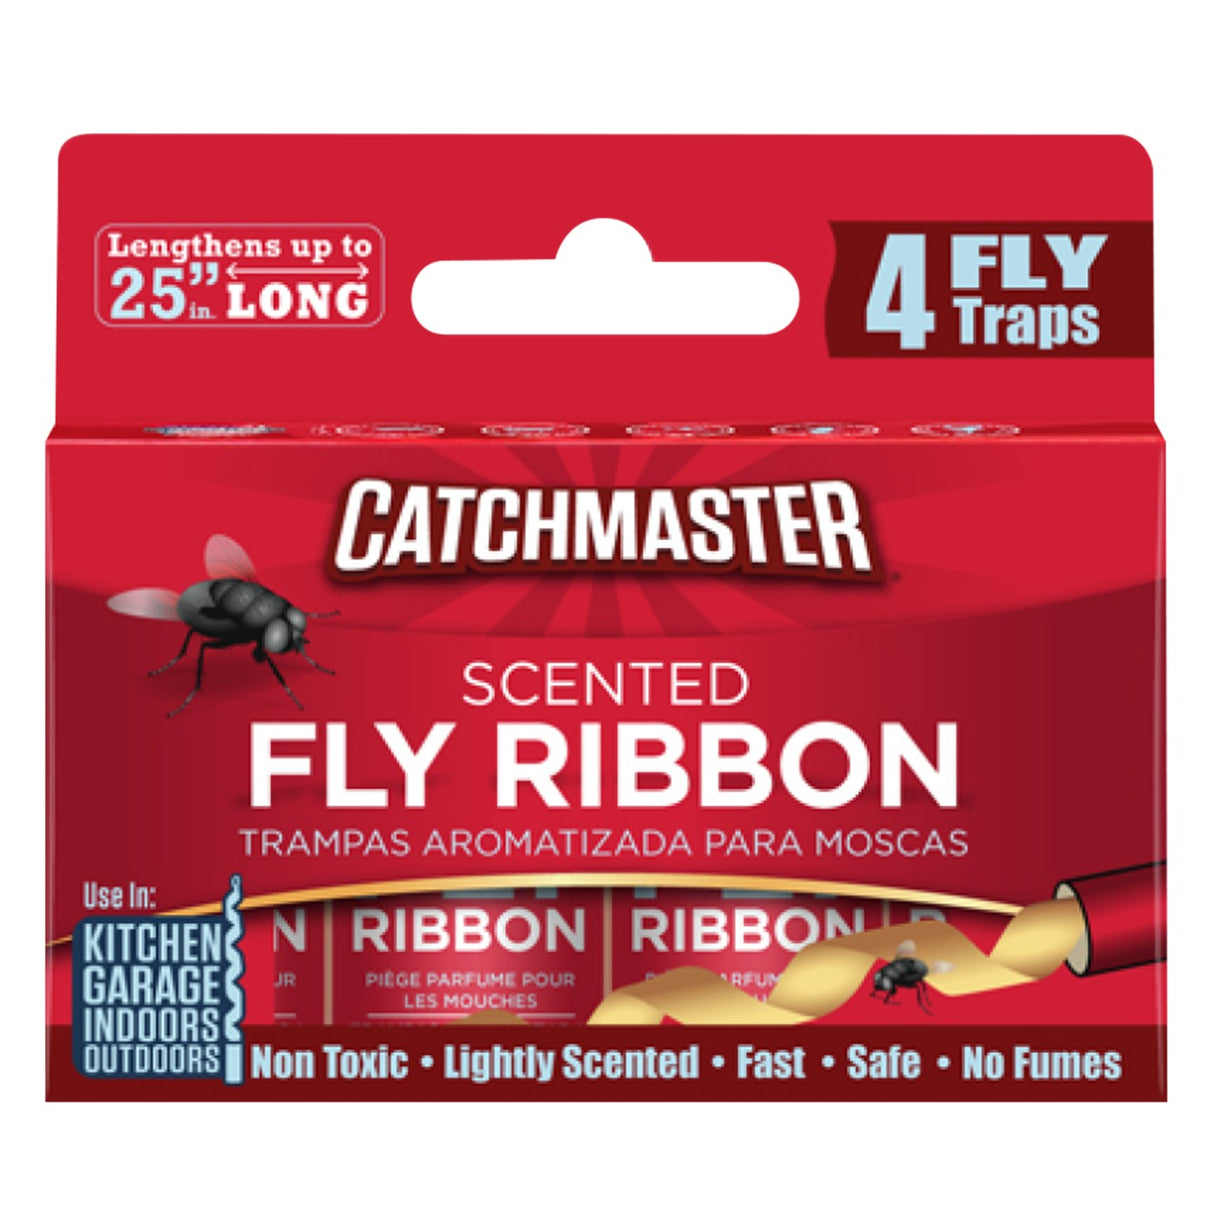 Catchmaster Fly Ribbons Fly Control